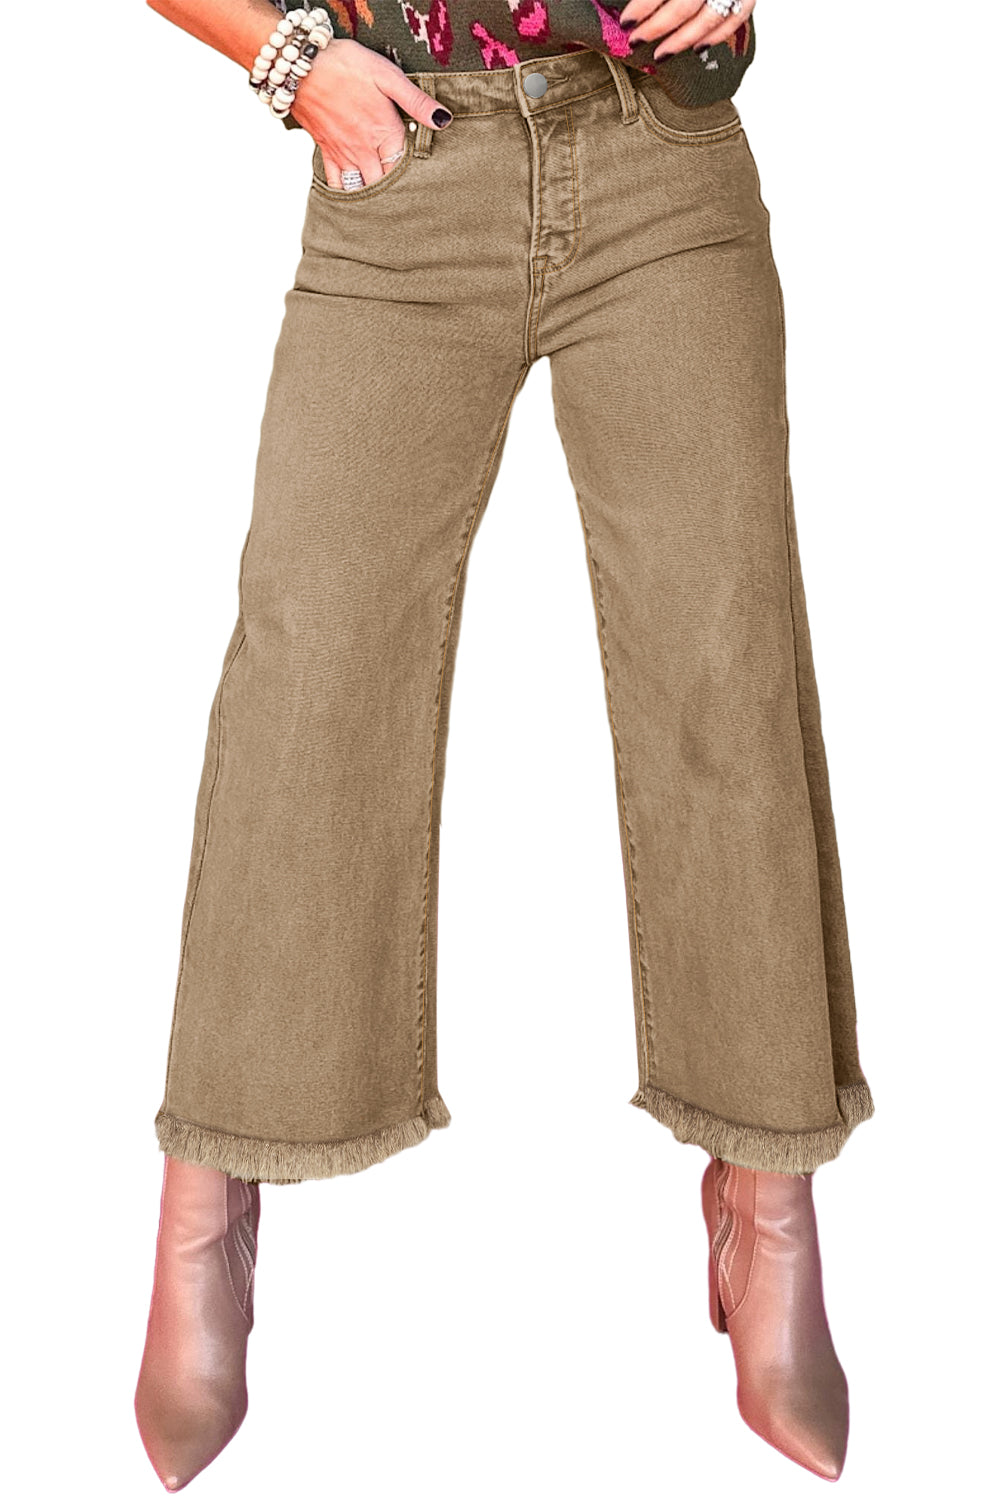 Light French Beige Acid Washed High Rise Cropped Jeans